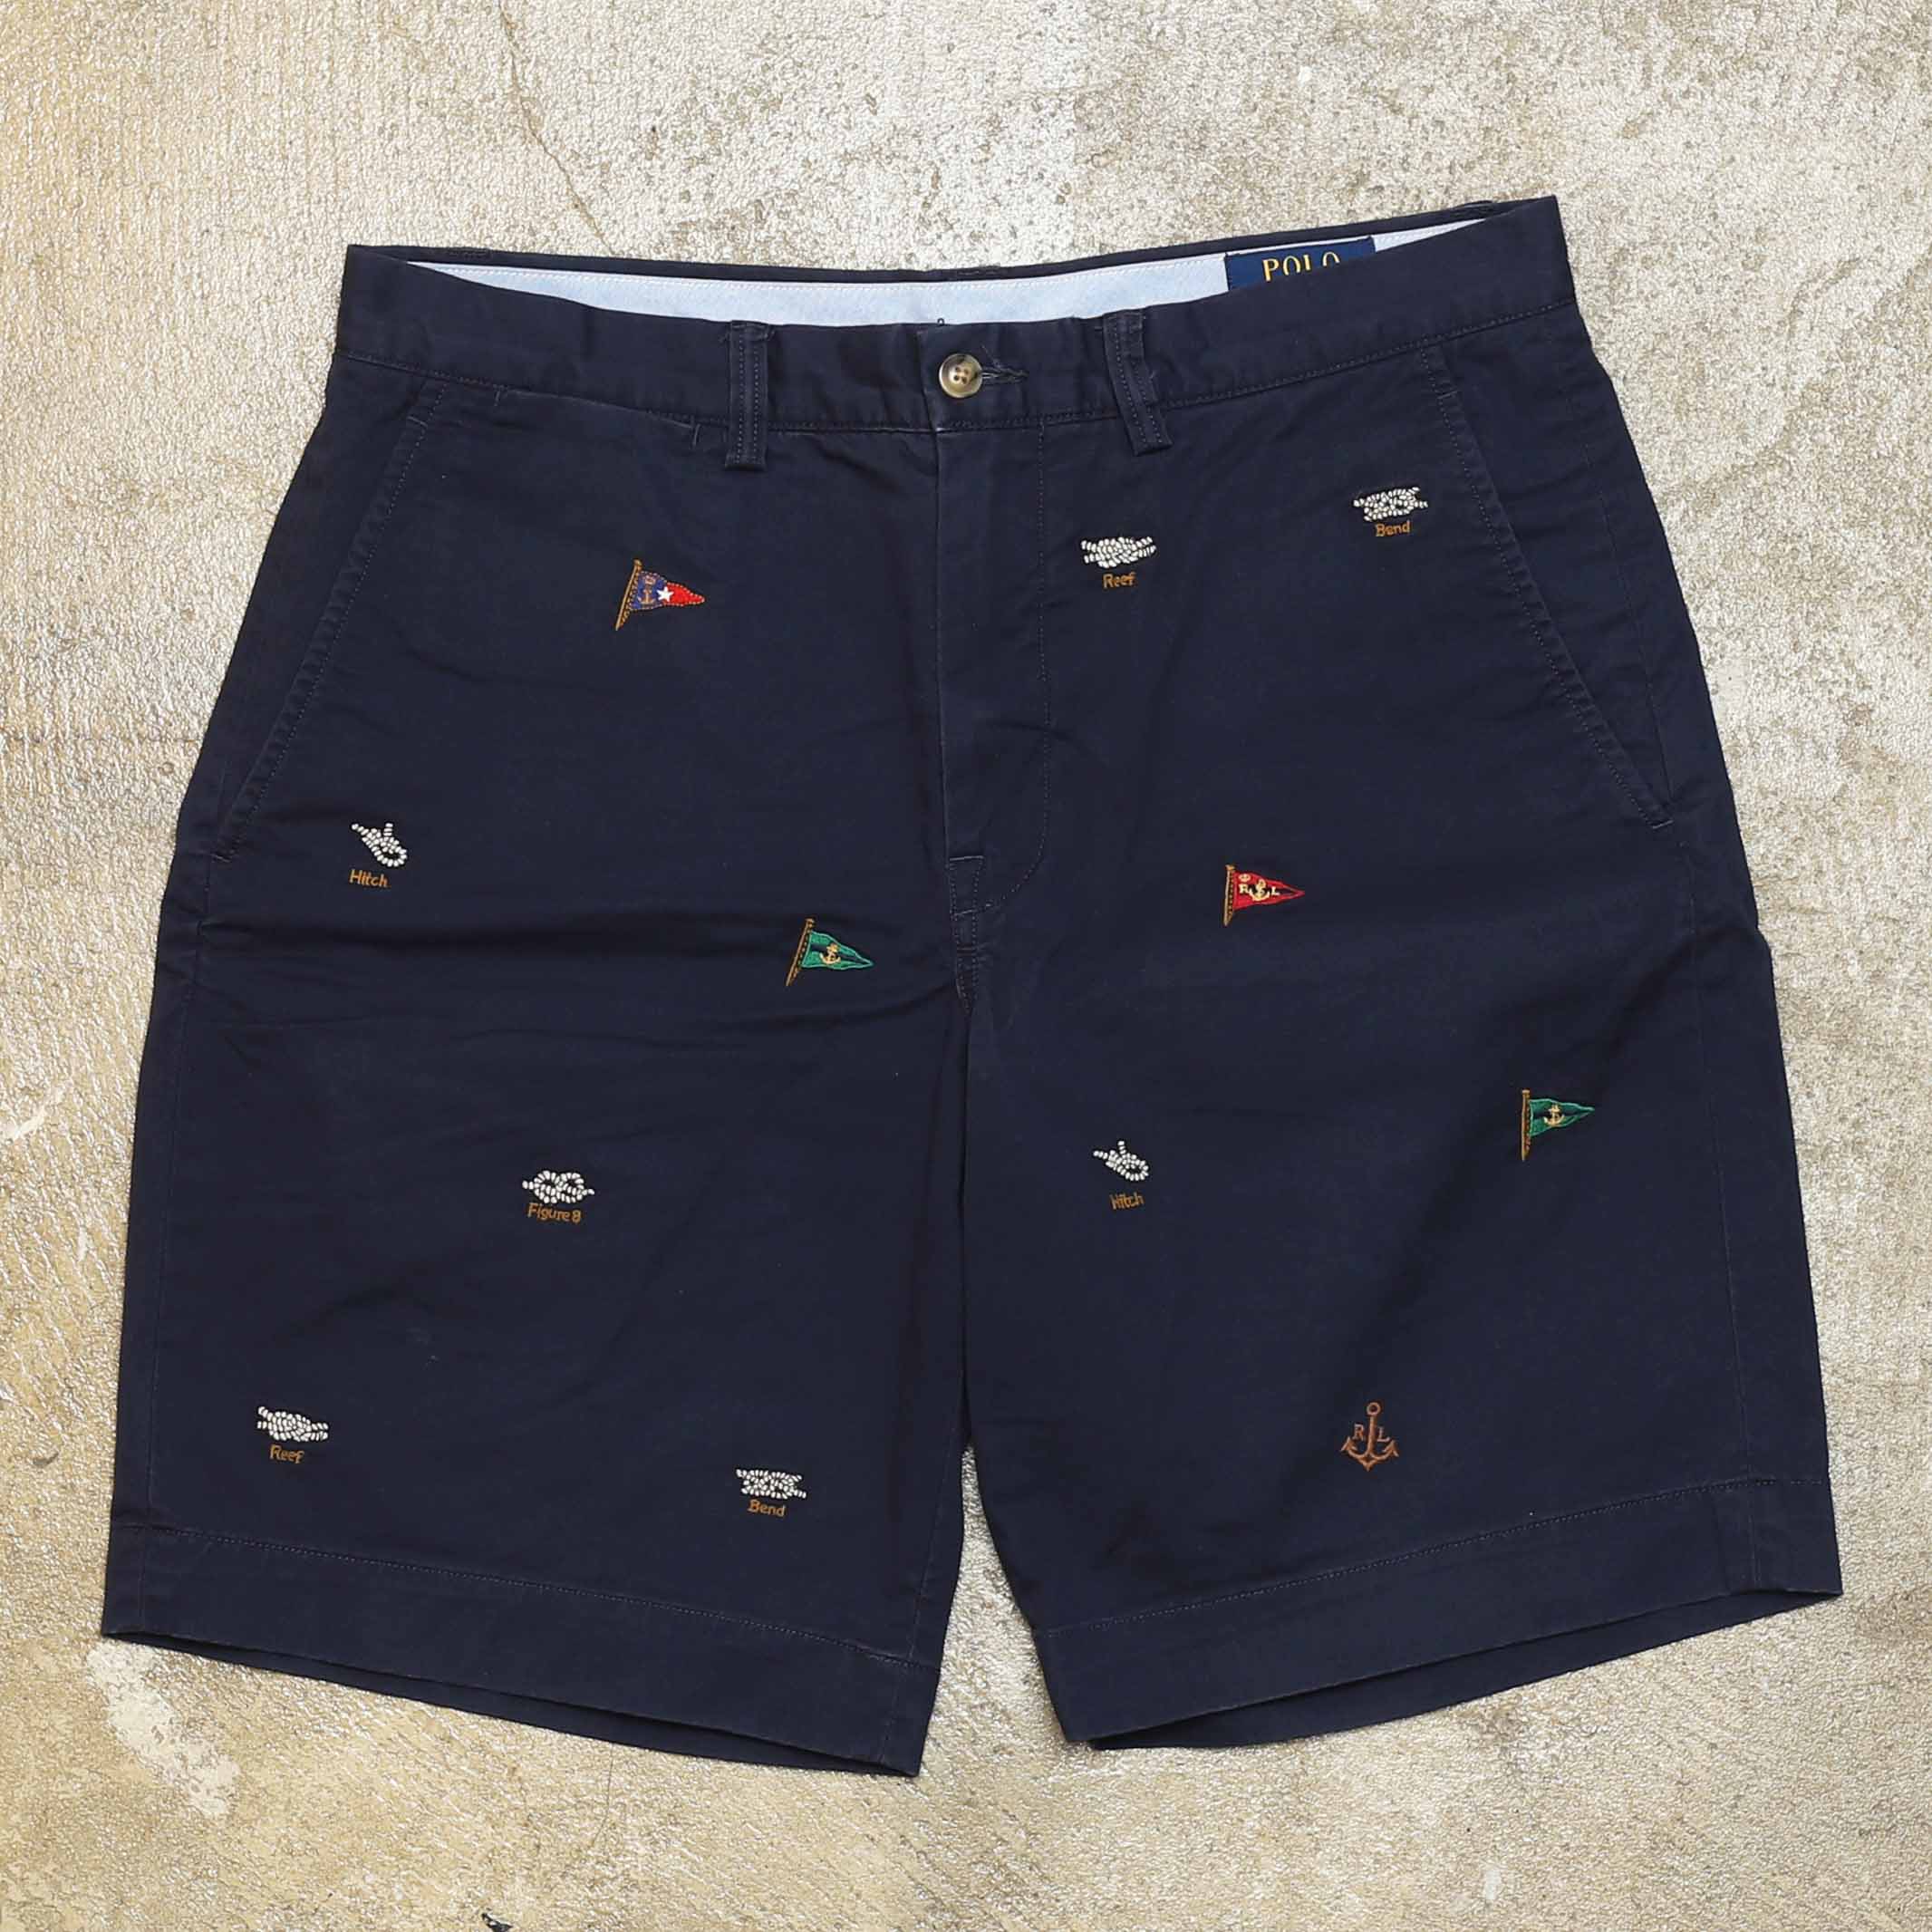 POLO RALPH LAUREN EMBROIDERED SHORTS - NAVY